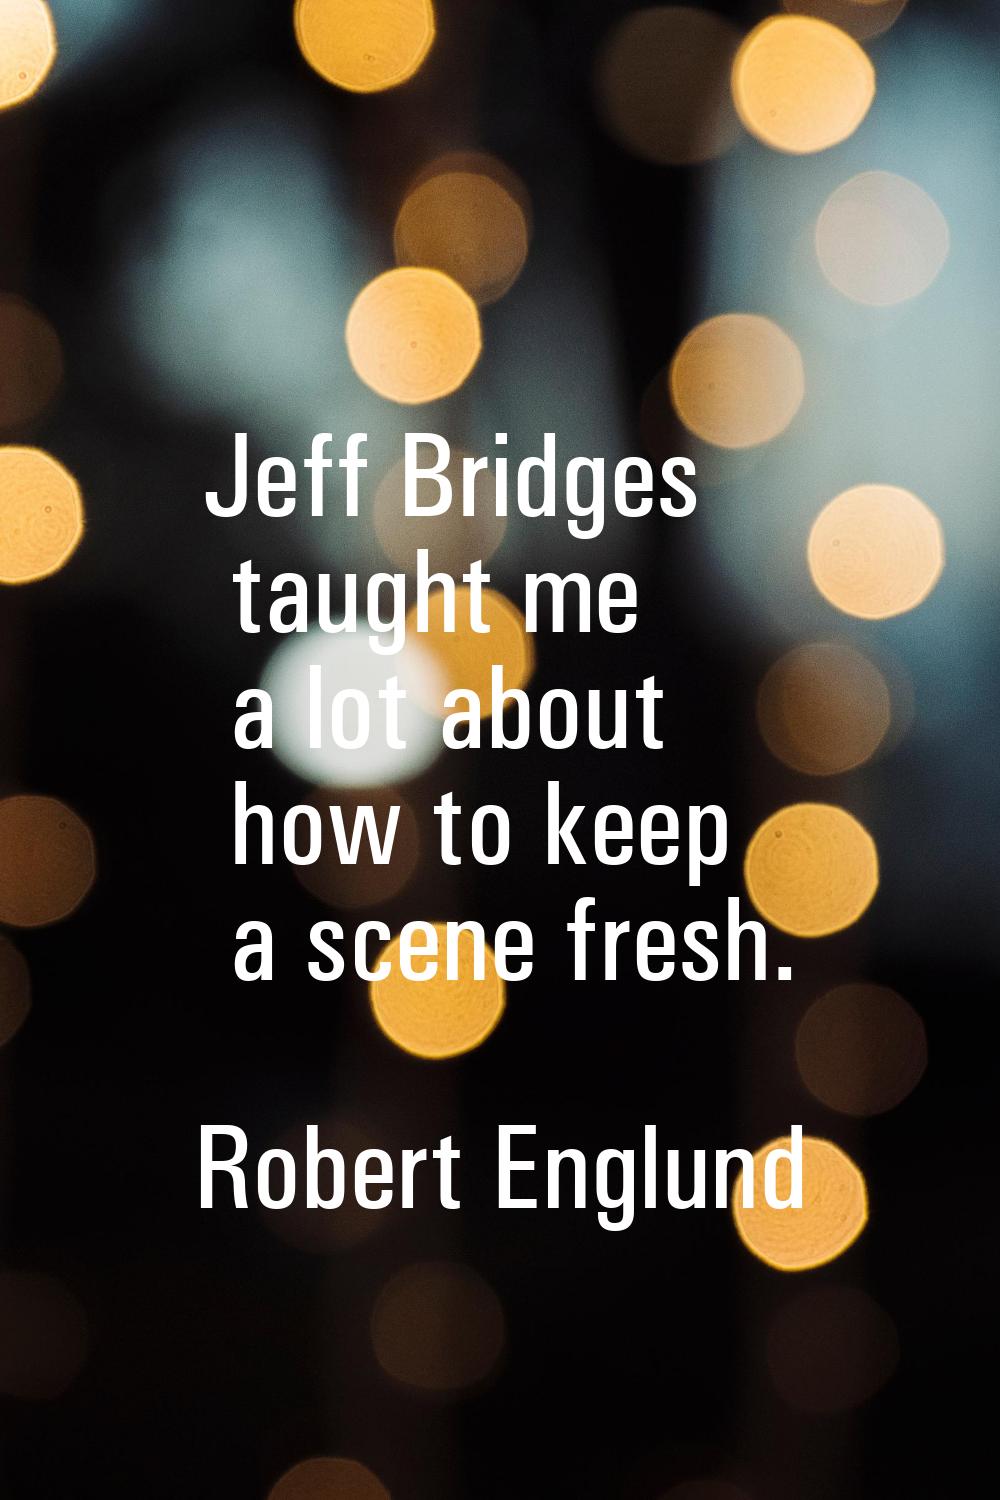 Jeff Bridges taught me a lot about how to keep a scene fresh.